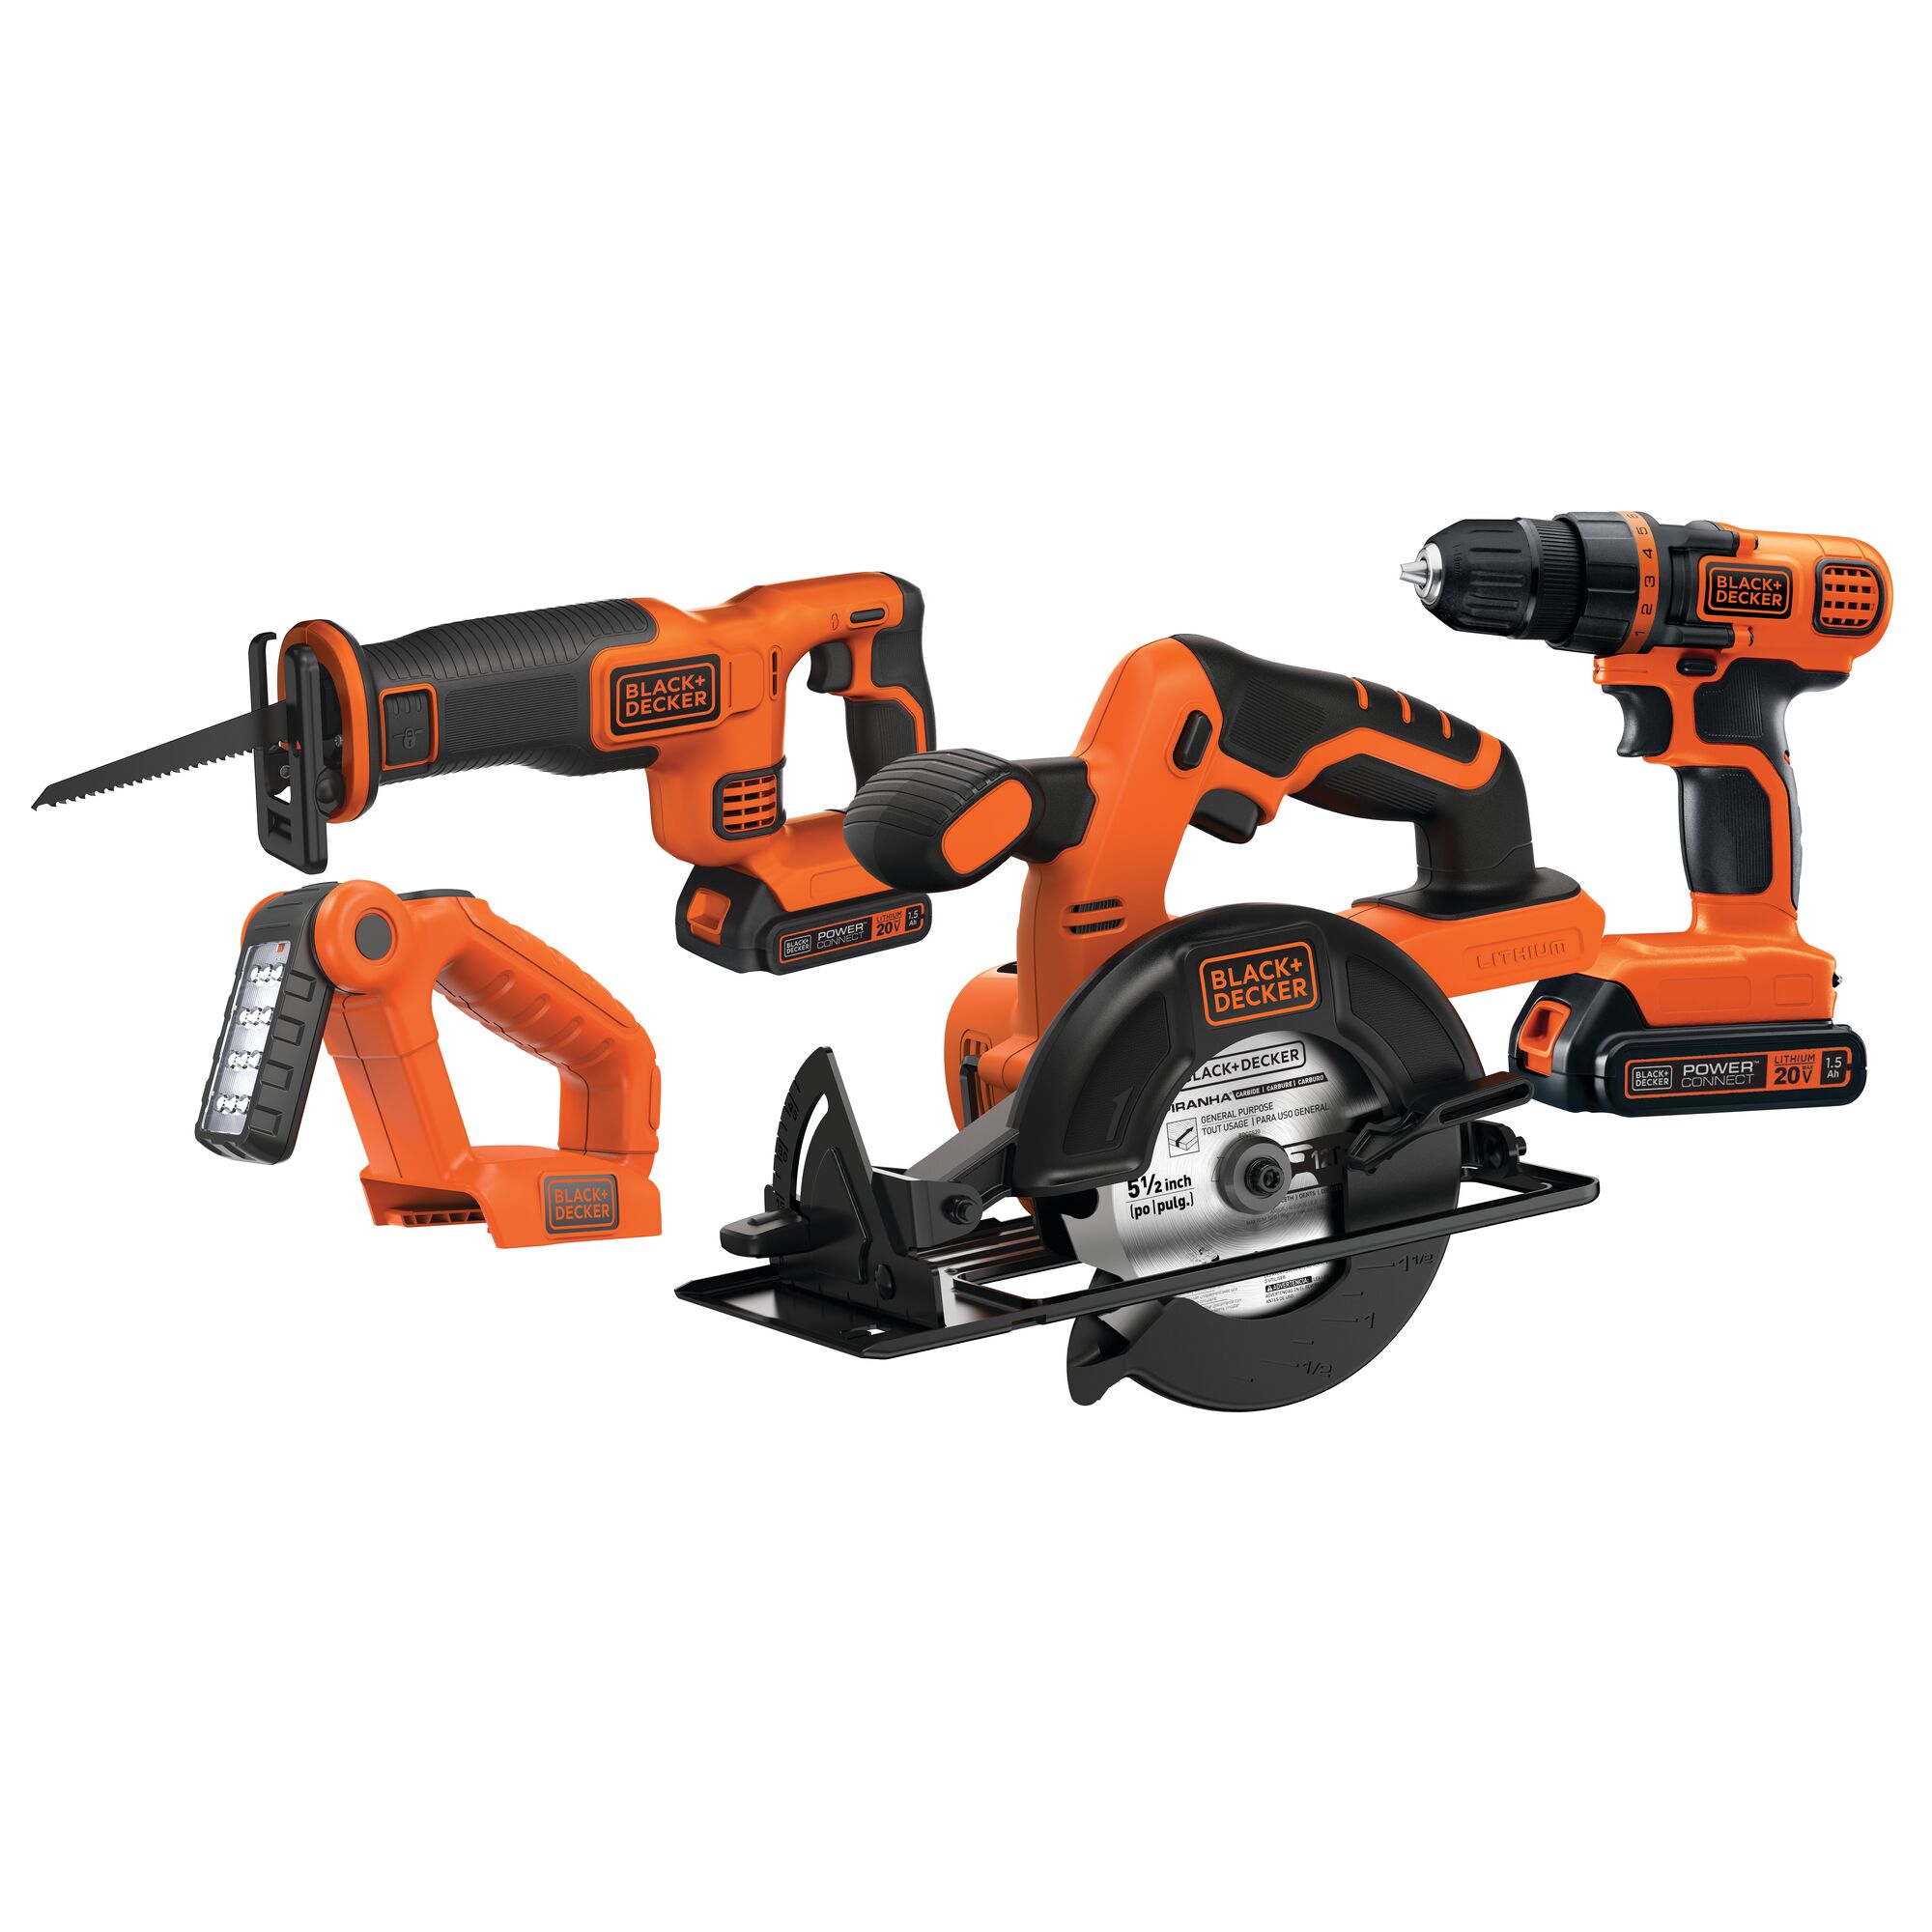 Black and Decker 20 volt max lithium ion 4 tool combo kit